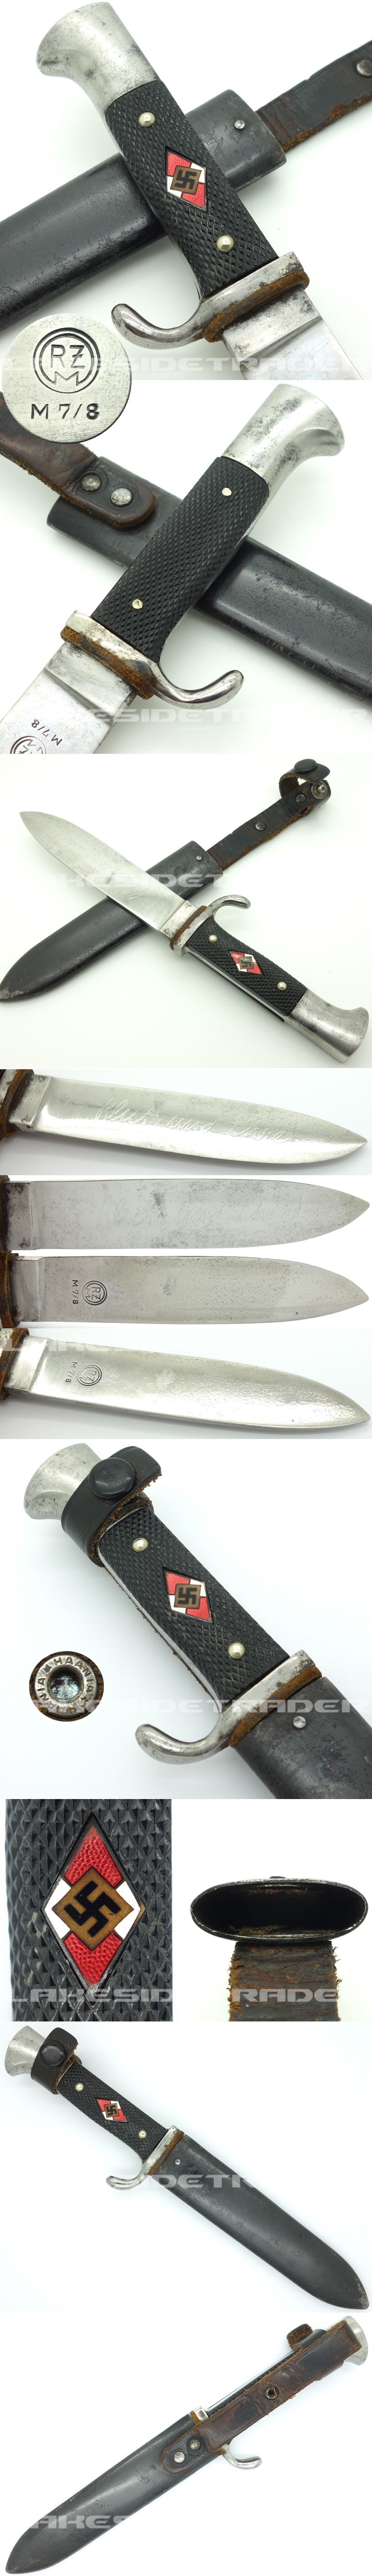 Transitional Hitler Youth Knife by RZM M7/8